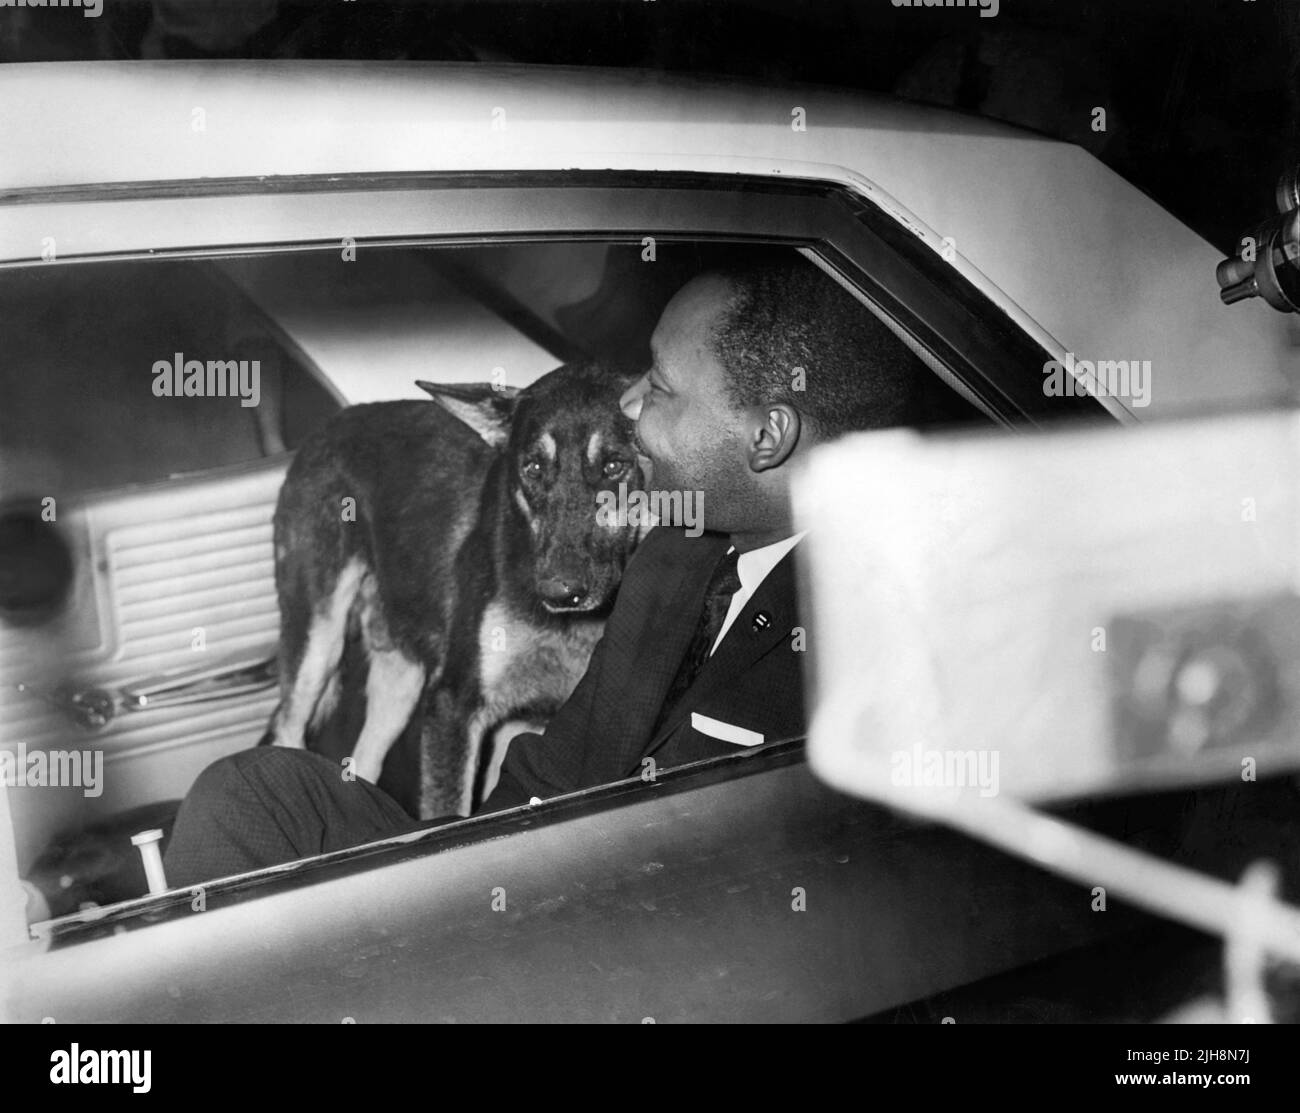 Martin Luther King being escorted with a police dog in the back of a Florida Highway Patrol car from the St. Johns County Grand Jury on June 12, 1964, after his arrest for attempting to eat at a whites-only restaurant at the Monson Motor Lodge in St. Augustine, Florida. King was arrested on June 11, 1964 and faced the St. Johns County Grand Jury on July 12th before being transferred to Duval County Jail (by order request from Florida Governor Farris Bryant) in Jacksonville, where he faced the Duval County Grand Jury on June 13, 1964. Stock Photo